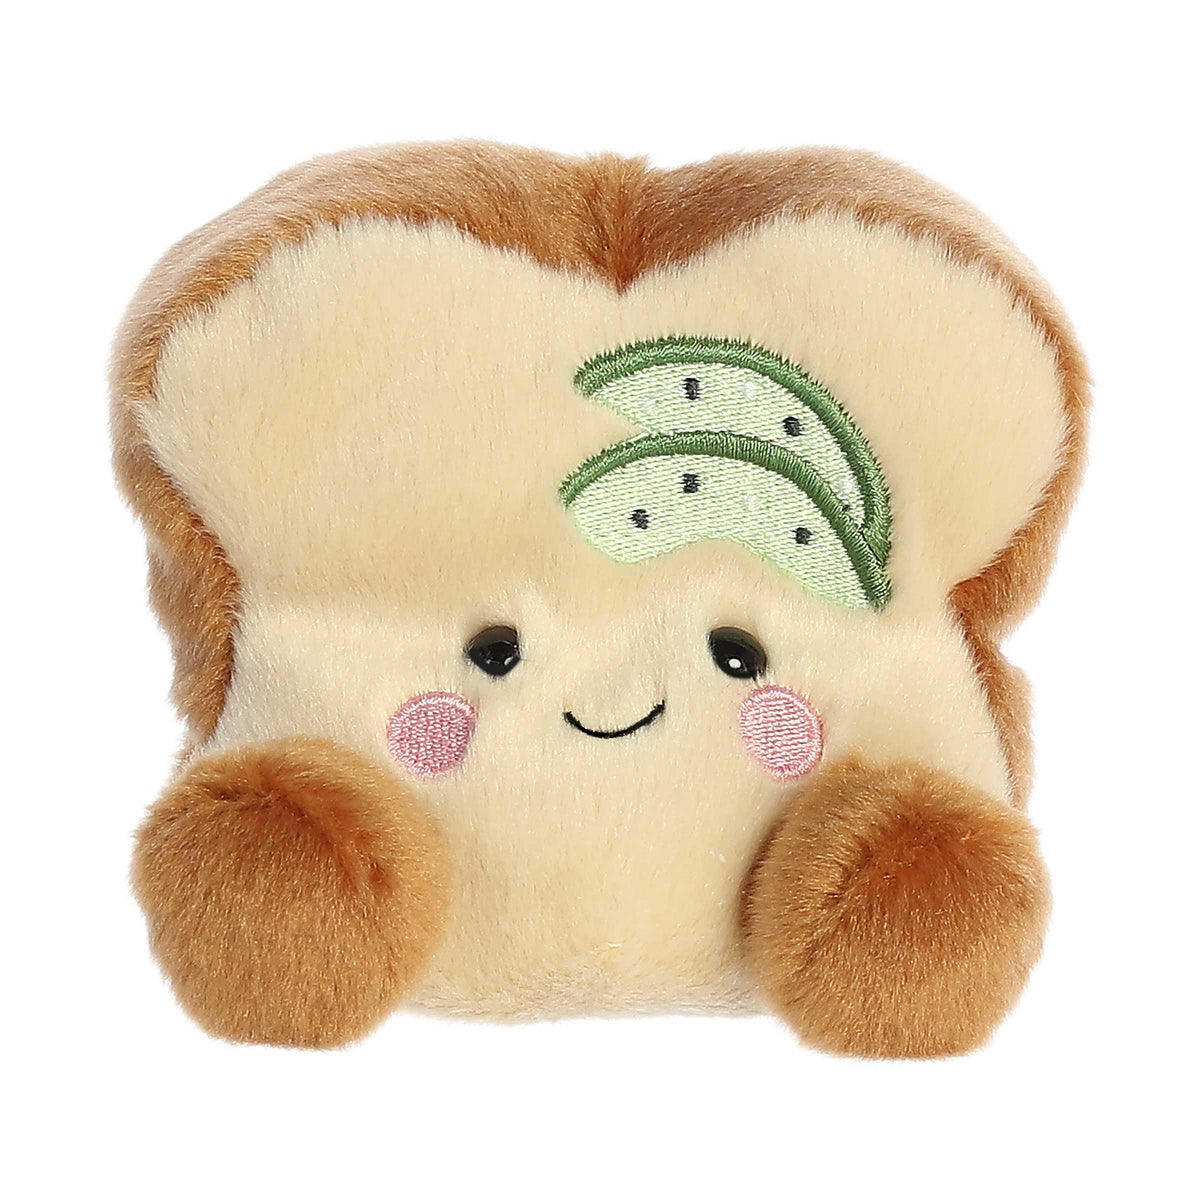 Cute cuddly avocado toast plush with brown fur body, dark brown toes, and green avocado slices design on the middle.